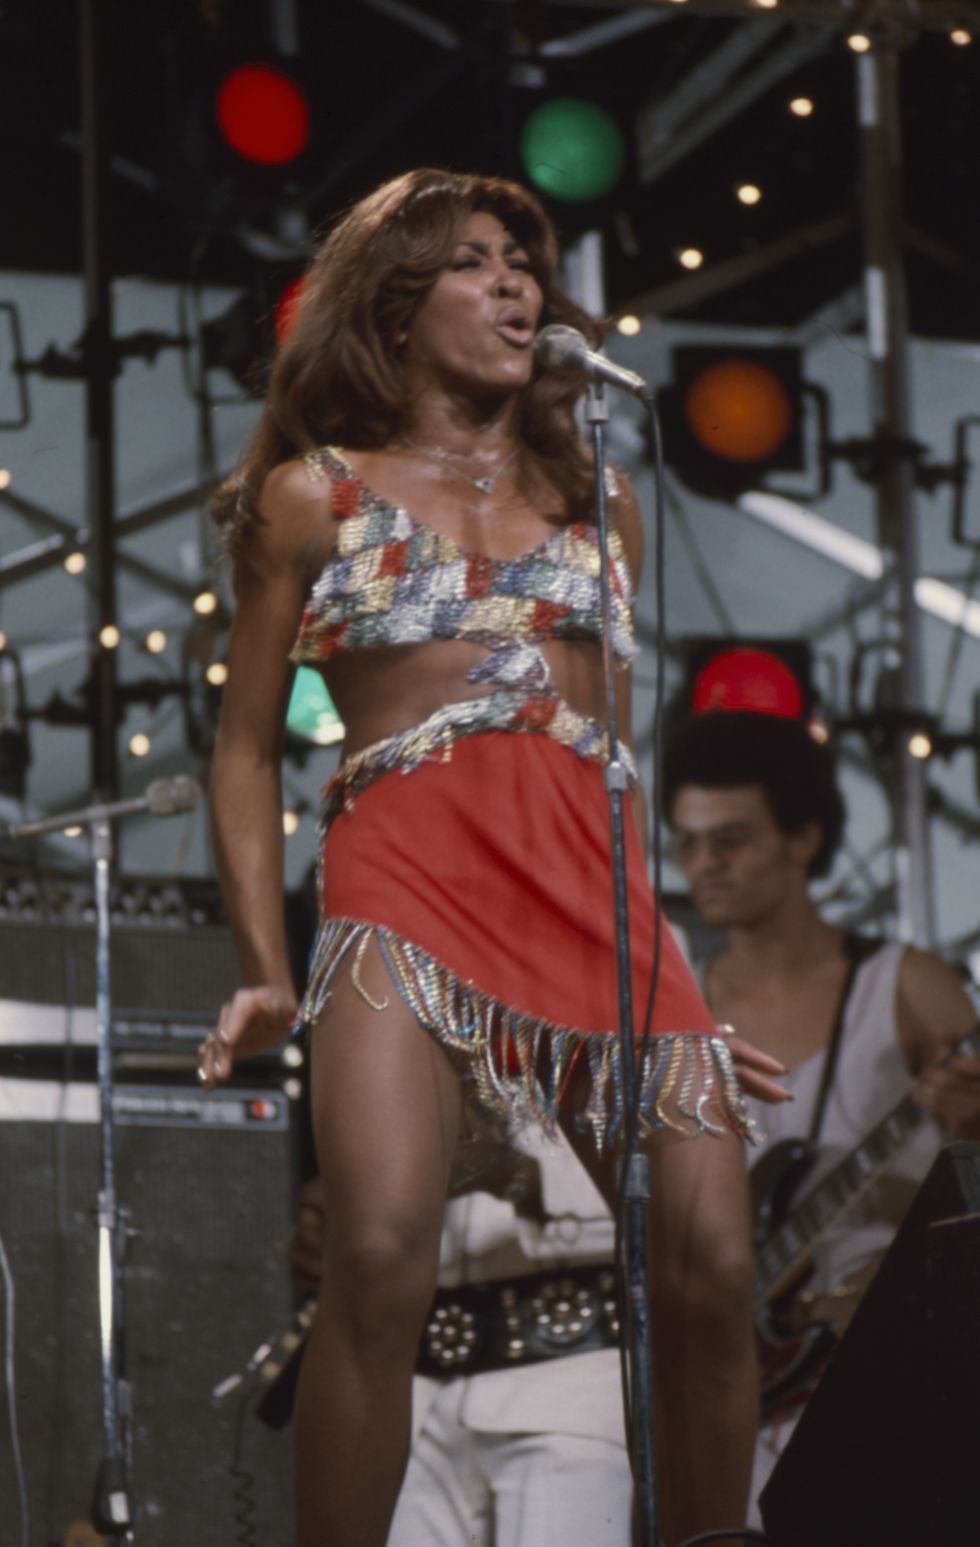 tina turner sings into a microphone on a stand, she wears a revealing minidress with beaded fringe